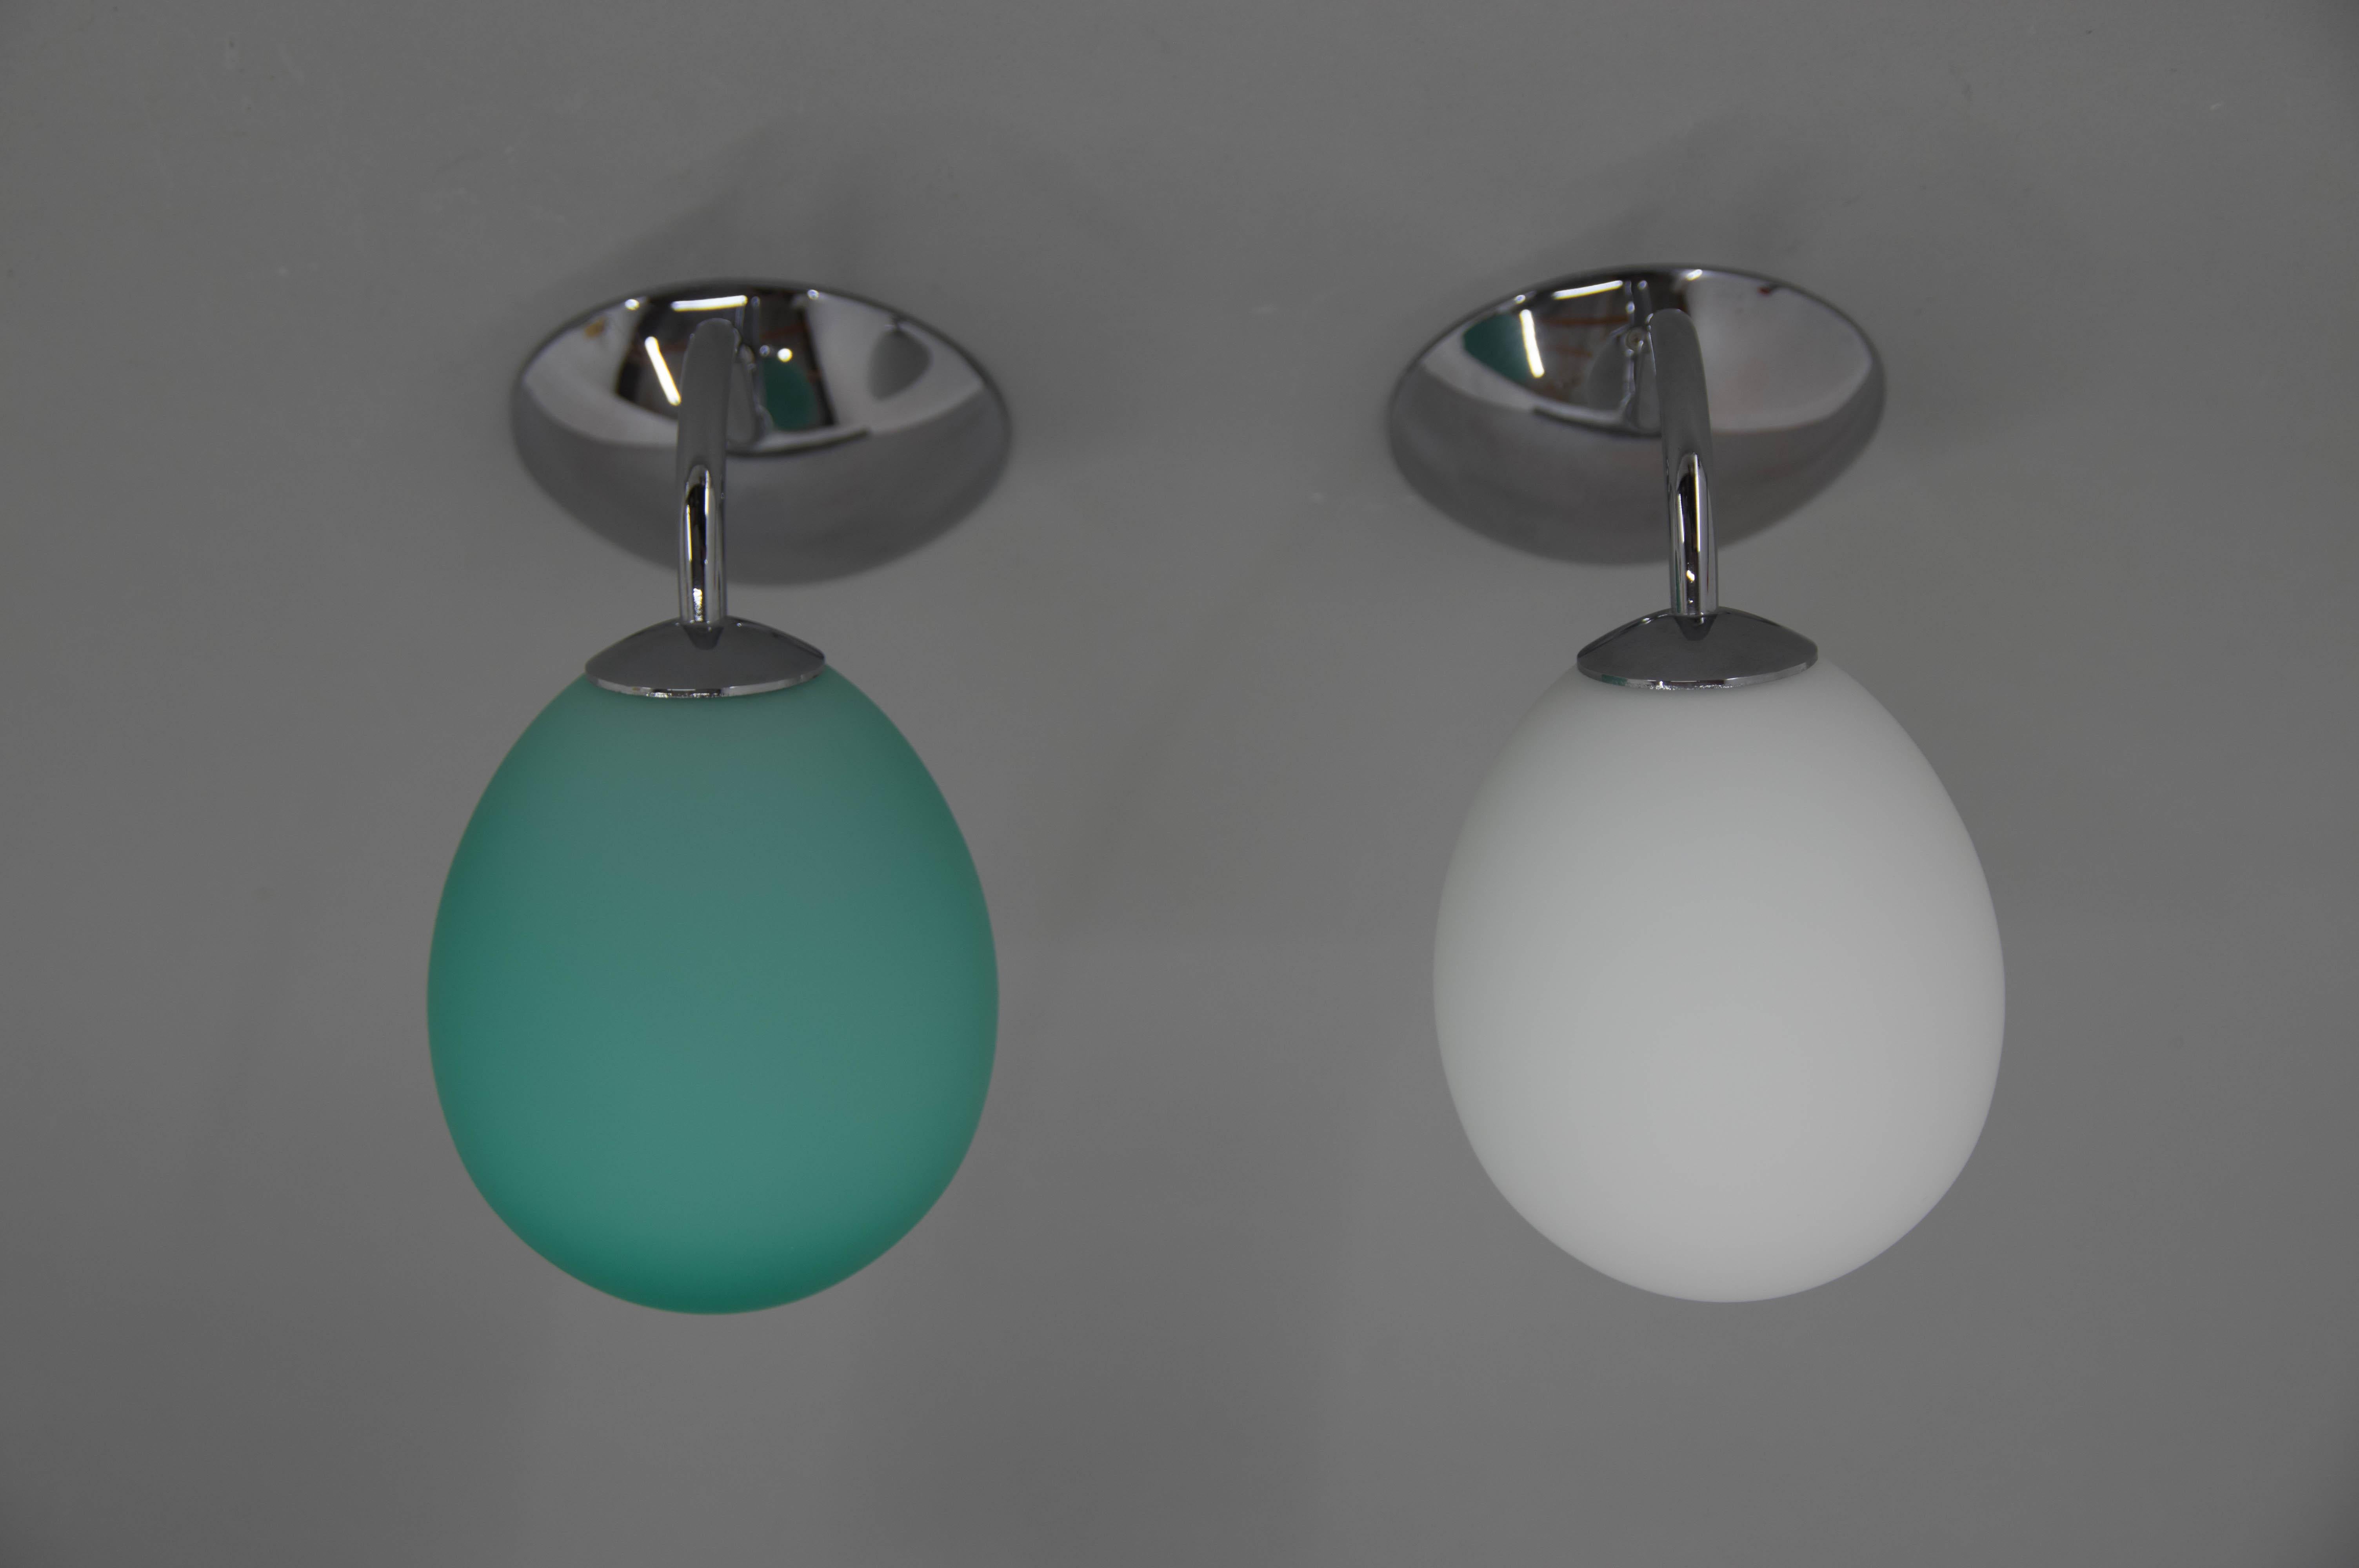 Set of Two Leucos P3 Wall Lights designed by Toso & Massari, Italy, 2010 For Sale 6